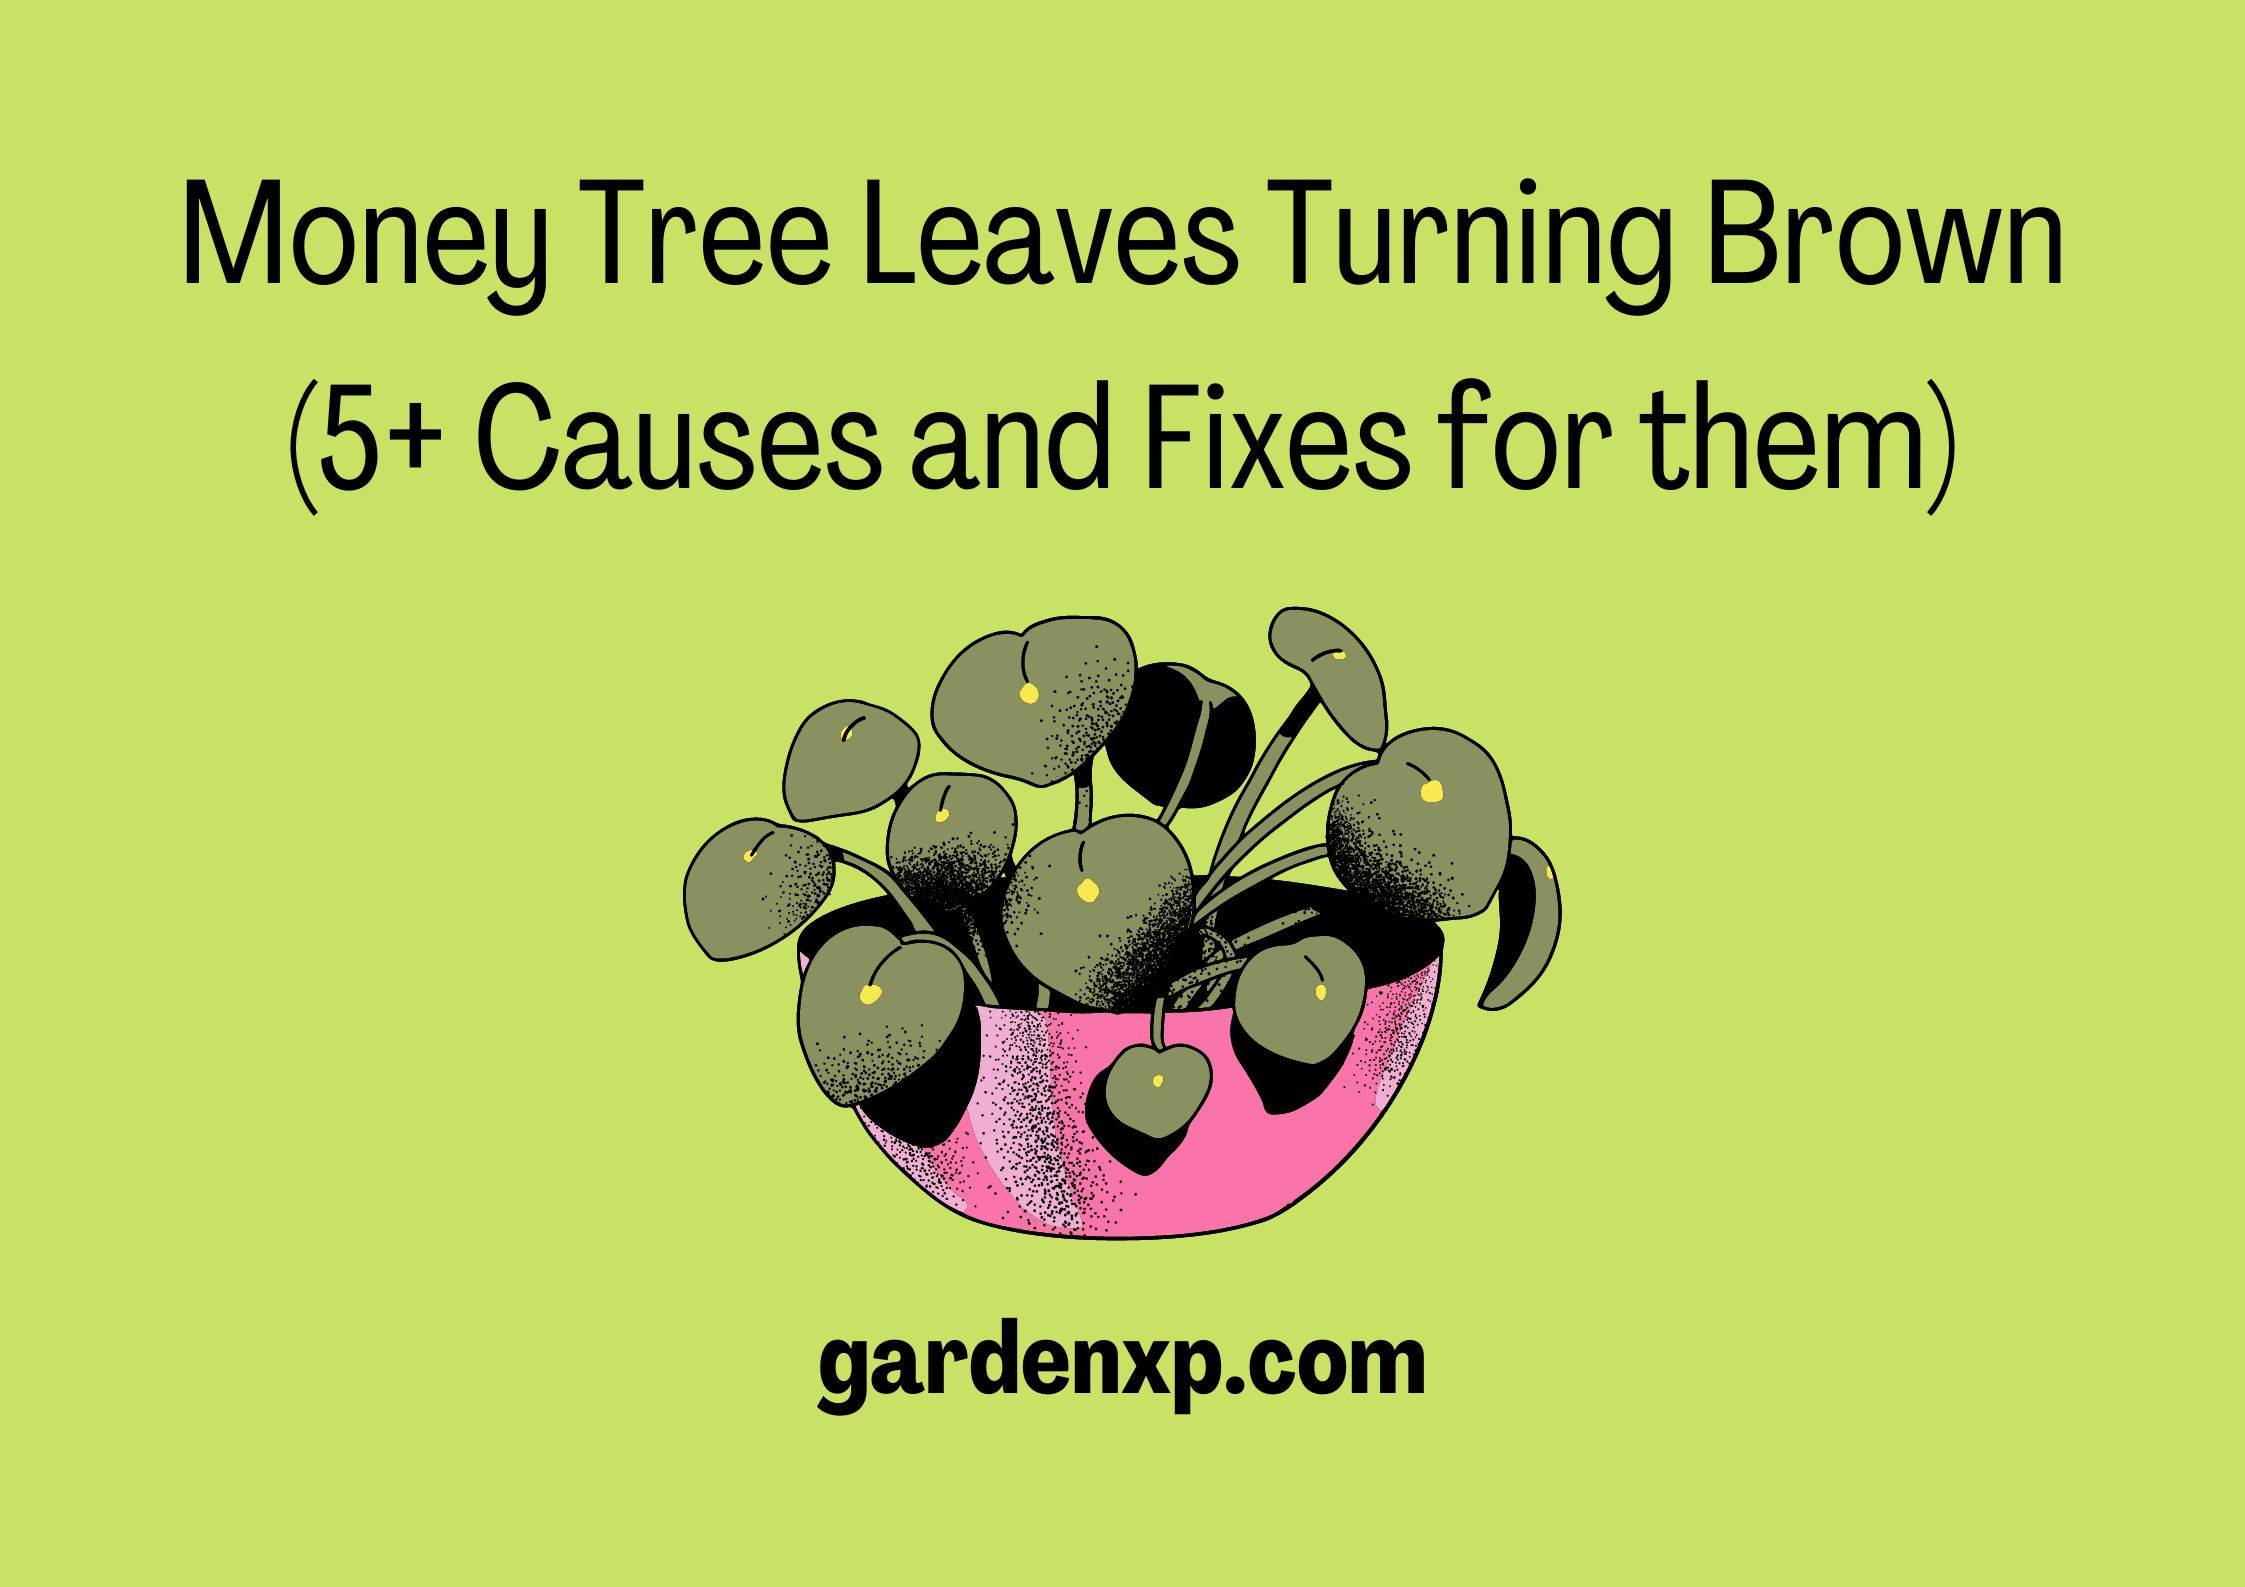 Money Tree Leaves Turning Brown (5+ Causes and Fixes for them)